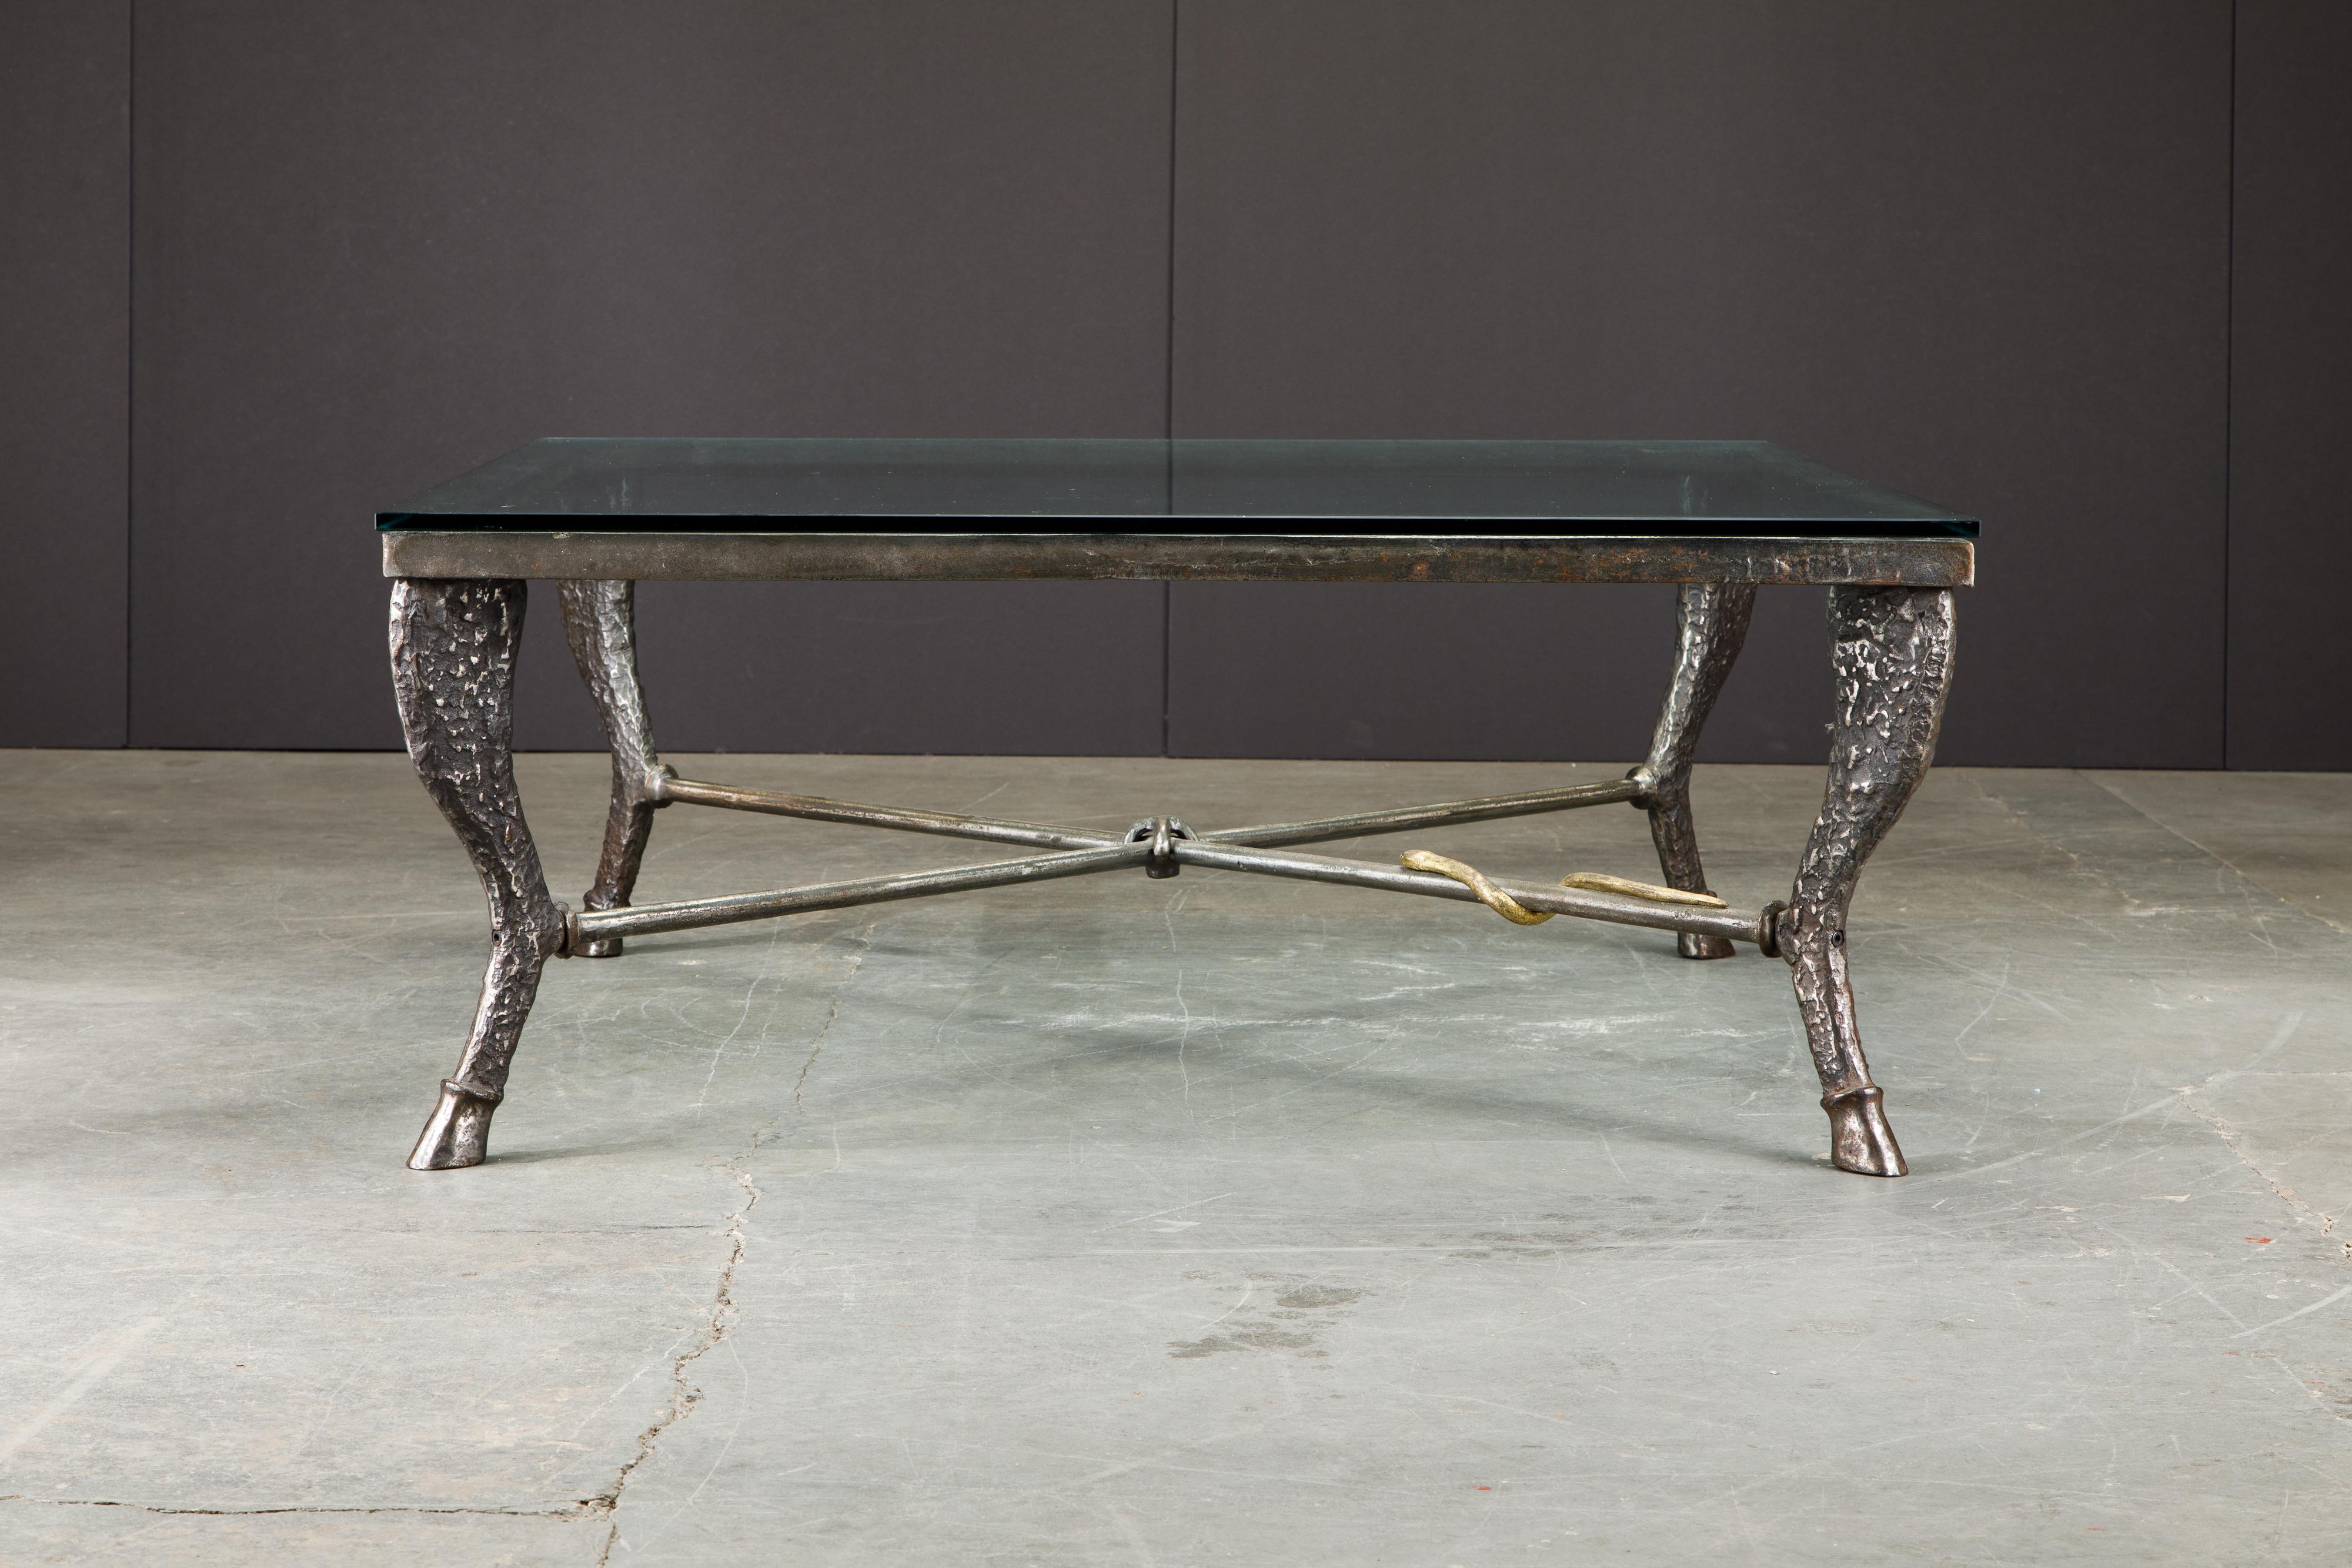 This beautiful patinated and gilt bronze 'Etruscan' coffee table by Christopher Chodoff, circa 1984, features beautiful details including the gilt bronze snake which appears to be crawling on the x-shaped stretcher knotted together in the center